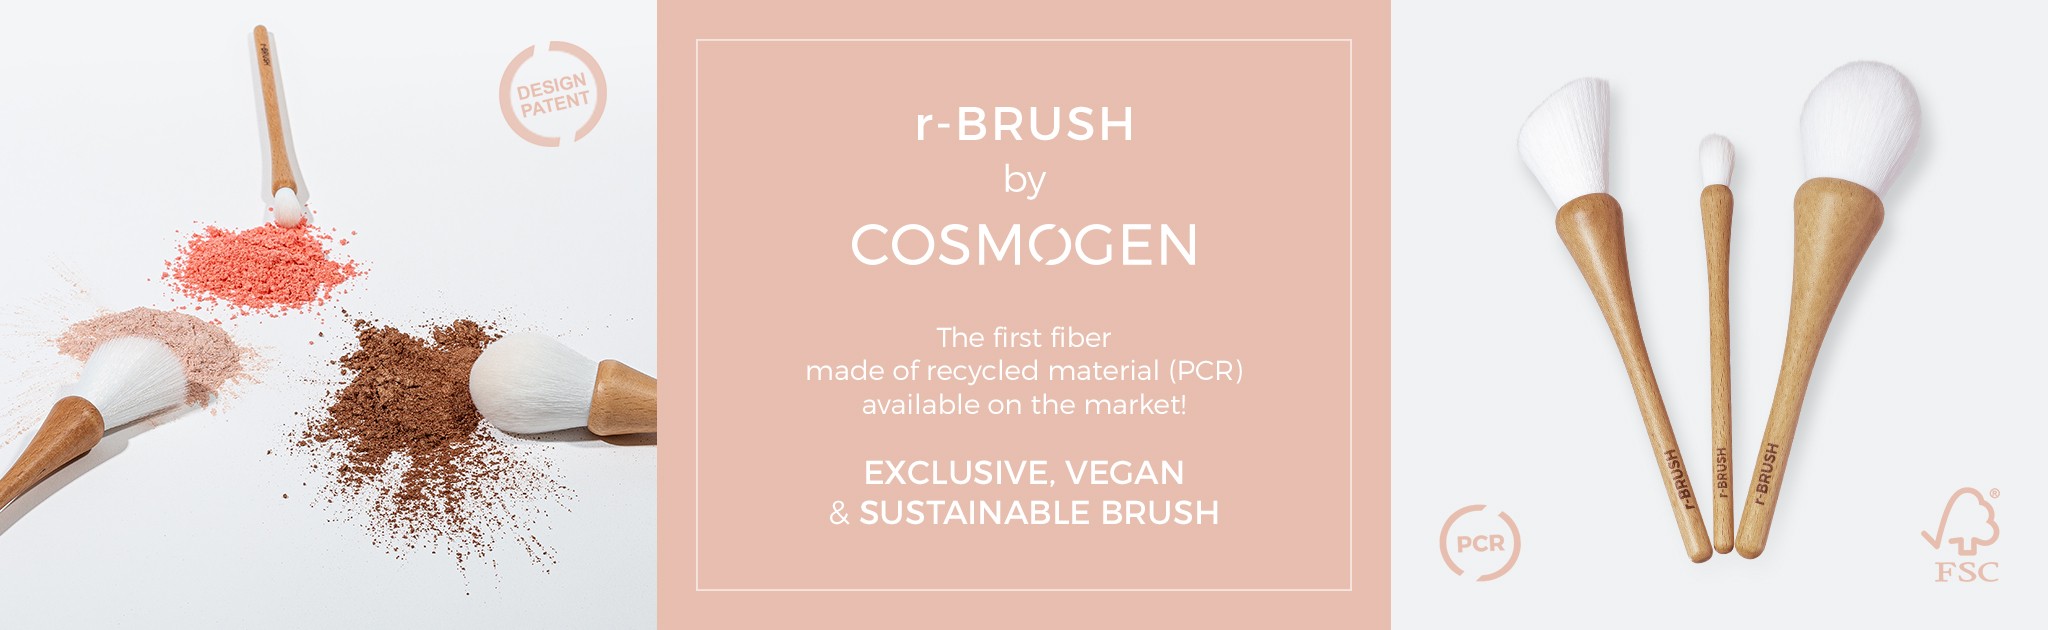 https://www.cosmogen.fr/r-brush-set.html?search_query=r-BRUSH&results=41